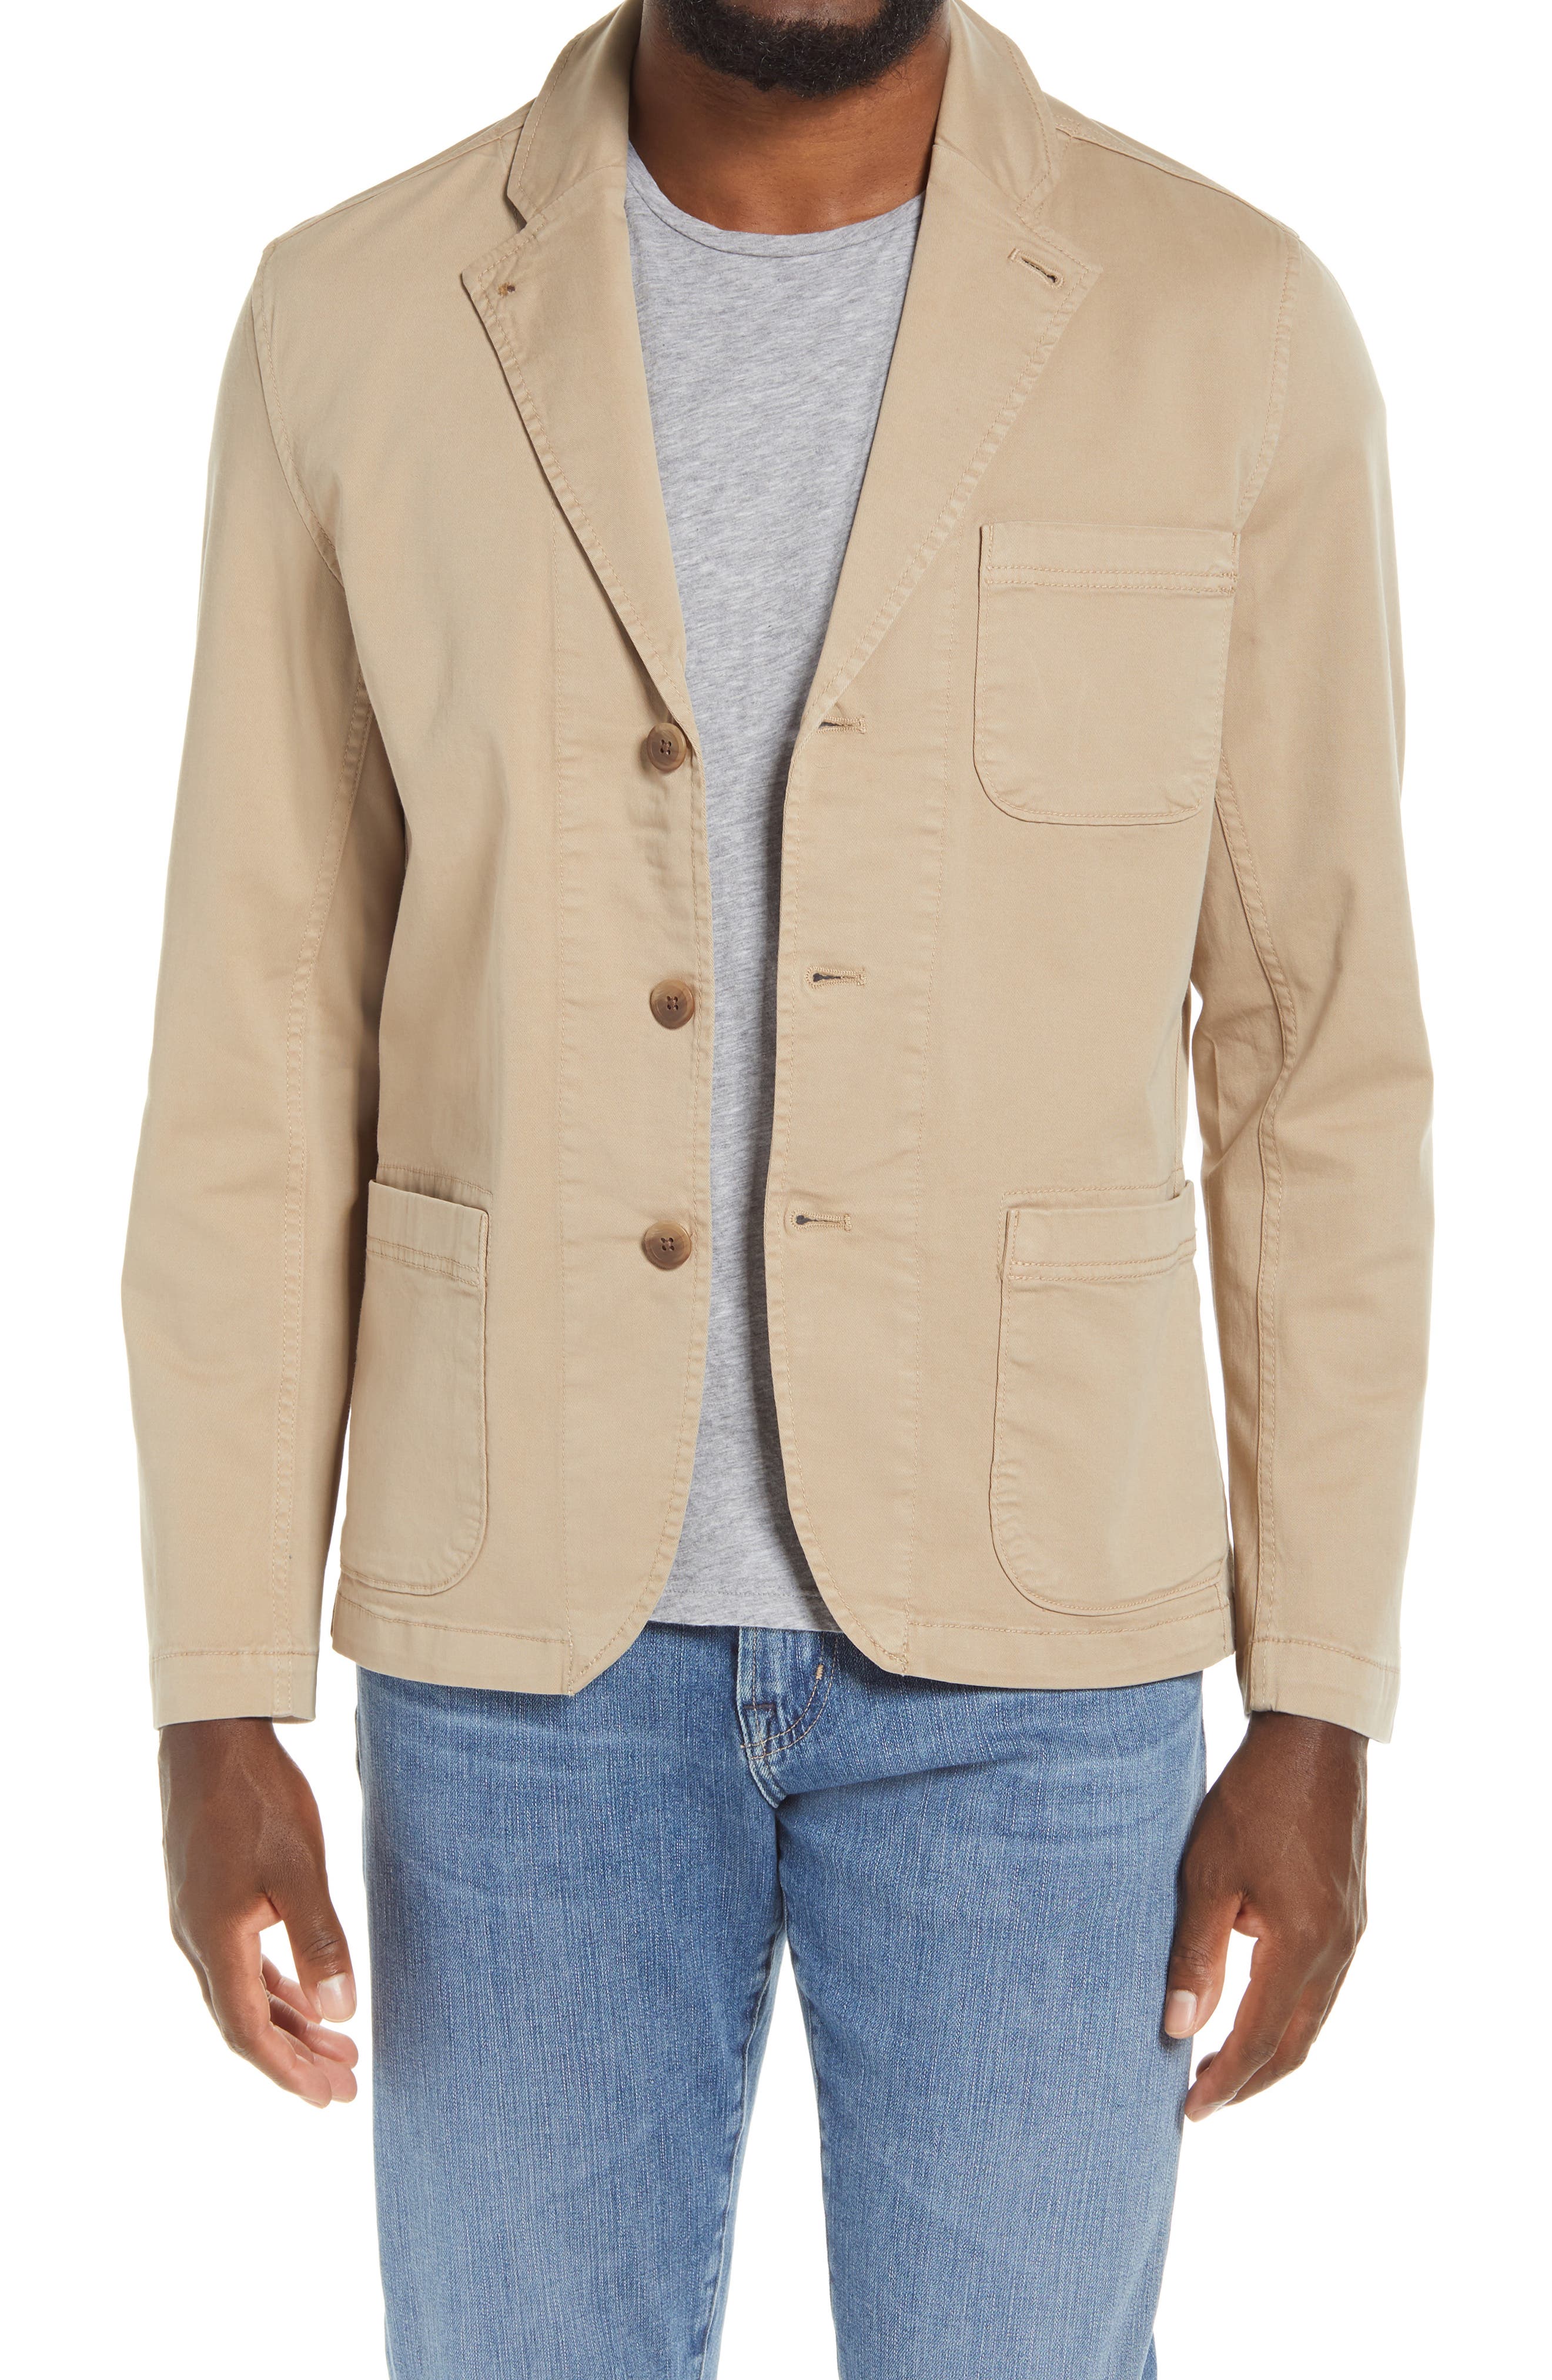 mens casual blazers to wear with jeans